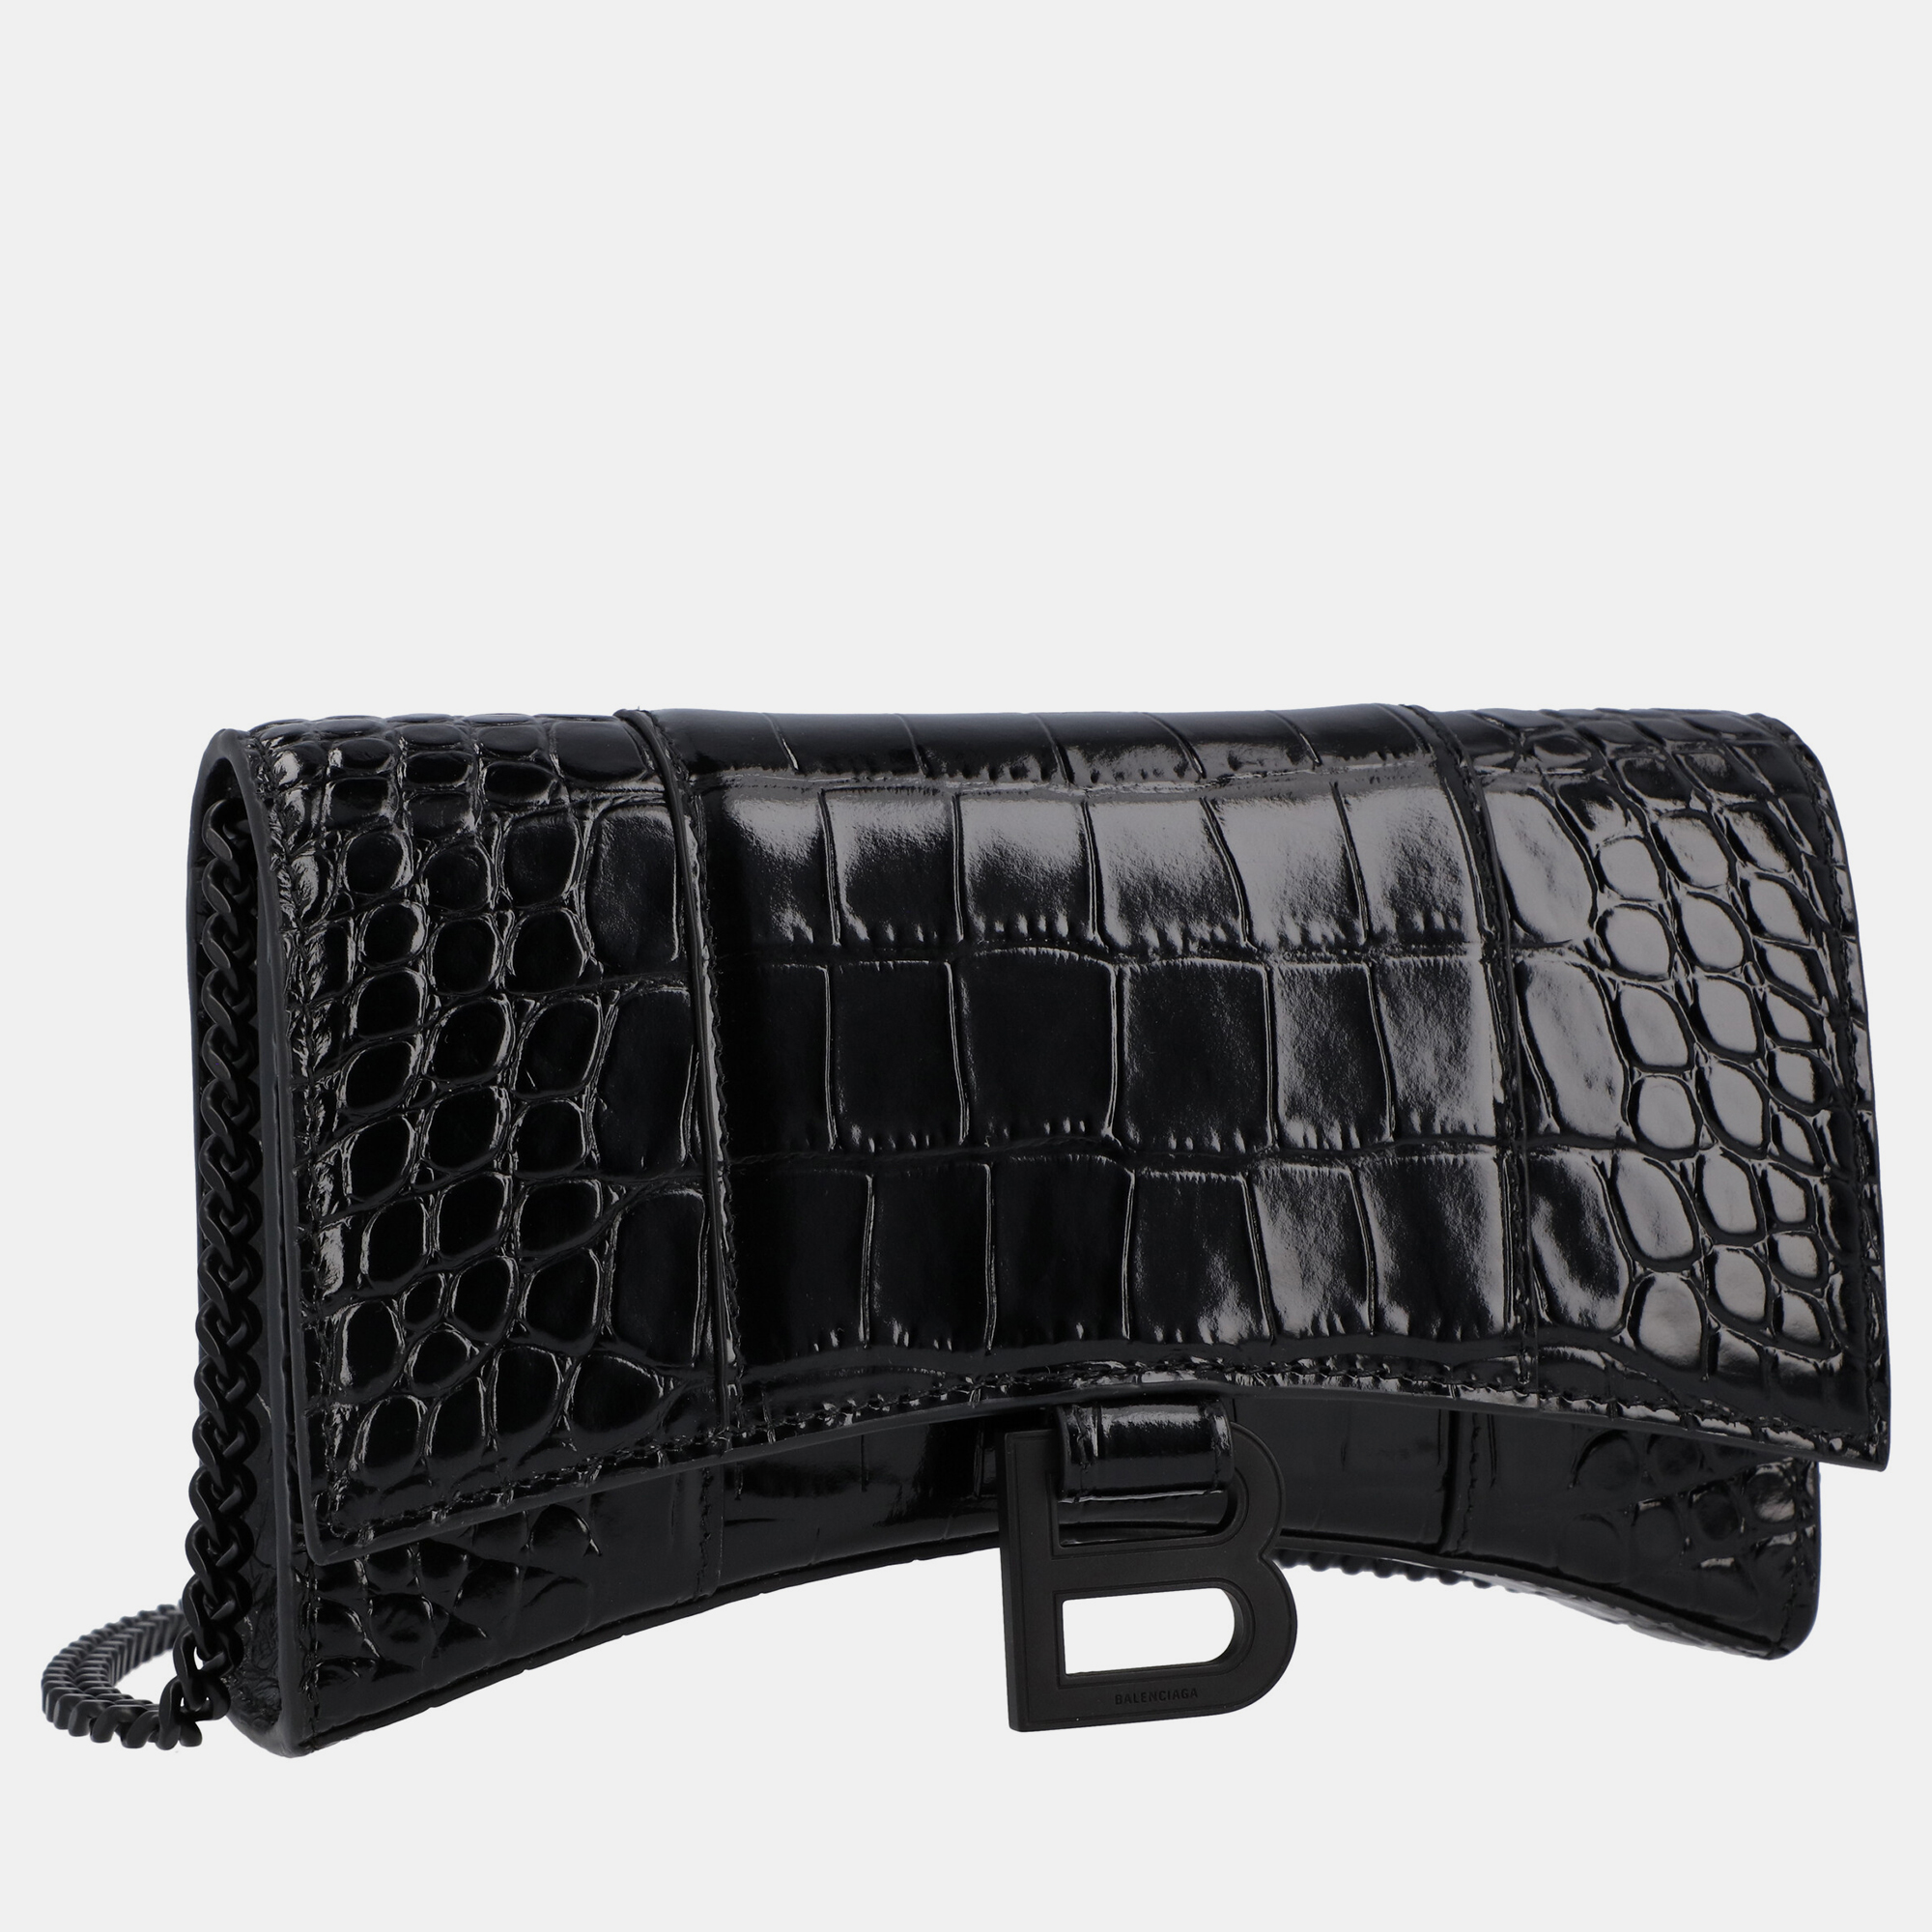 

Balenciaga Black Croc Embossed Leather Hourglass Wallet on Chain